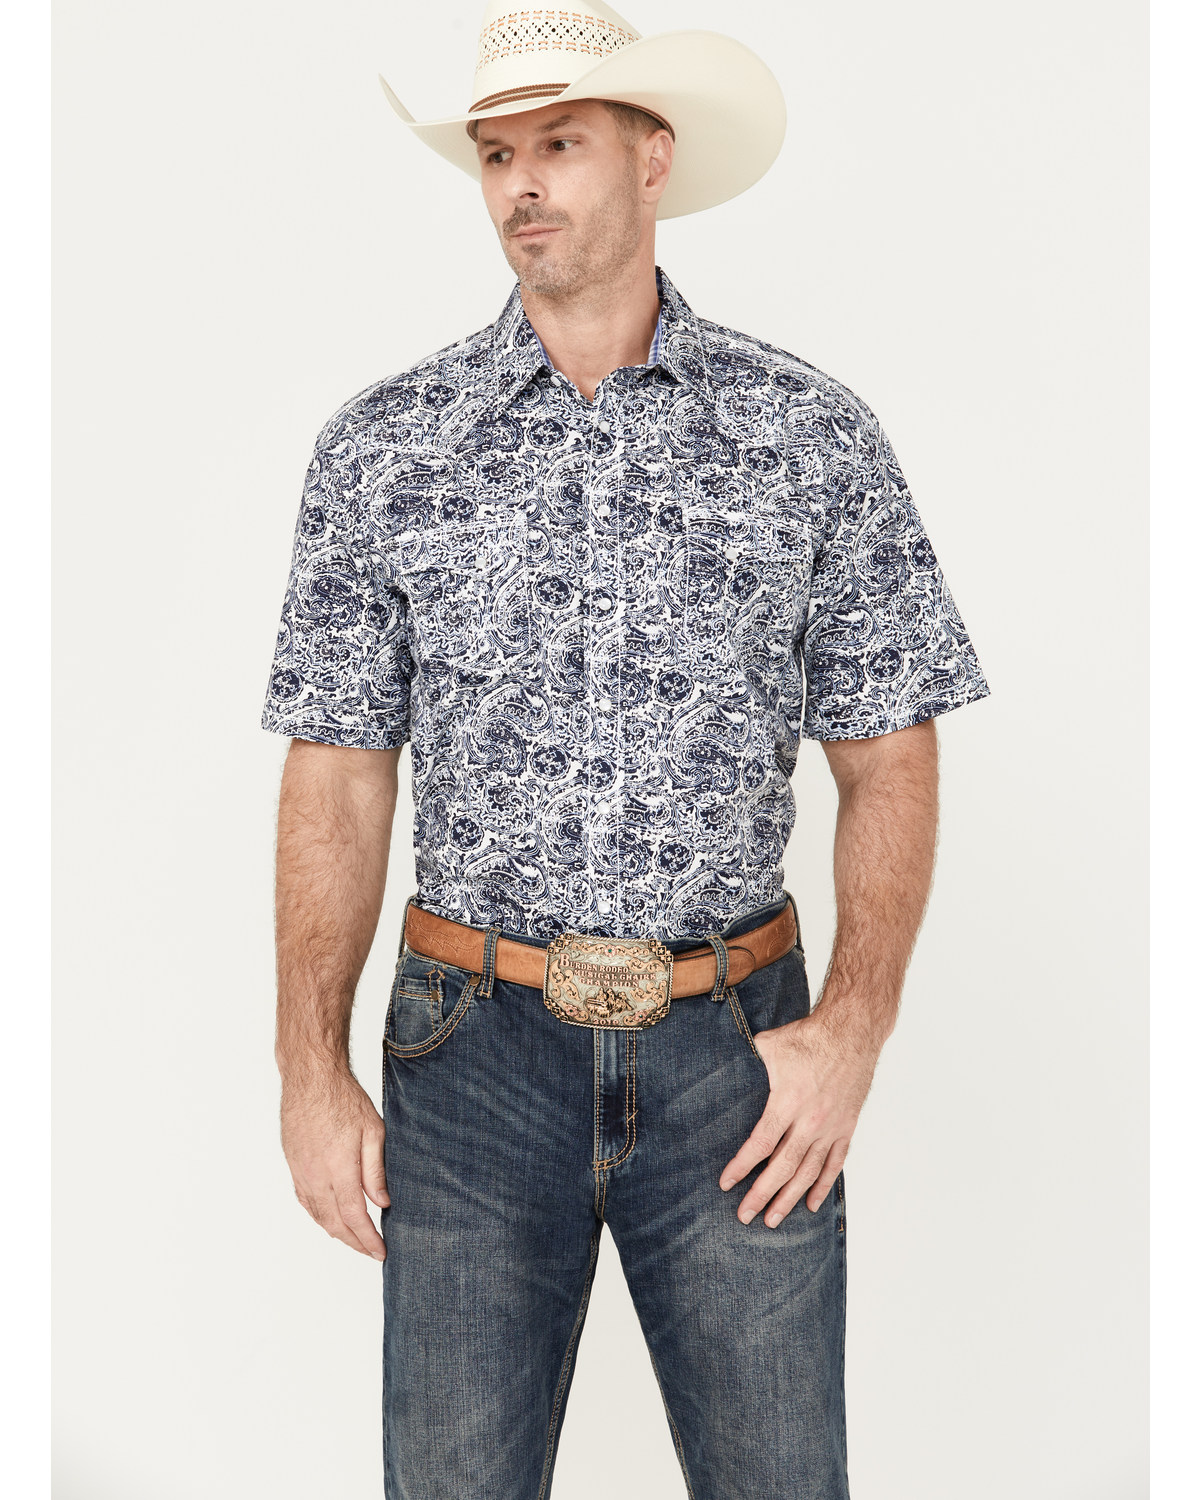 Rough Stock by Panhandle Men's Paisley Print Short Sleeve Pearl Snap Western Shirt